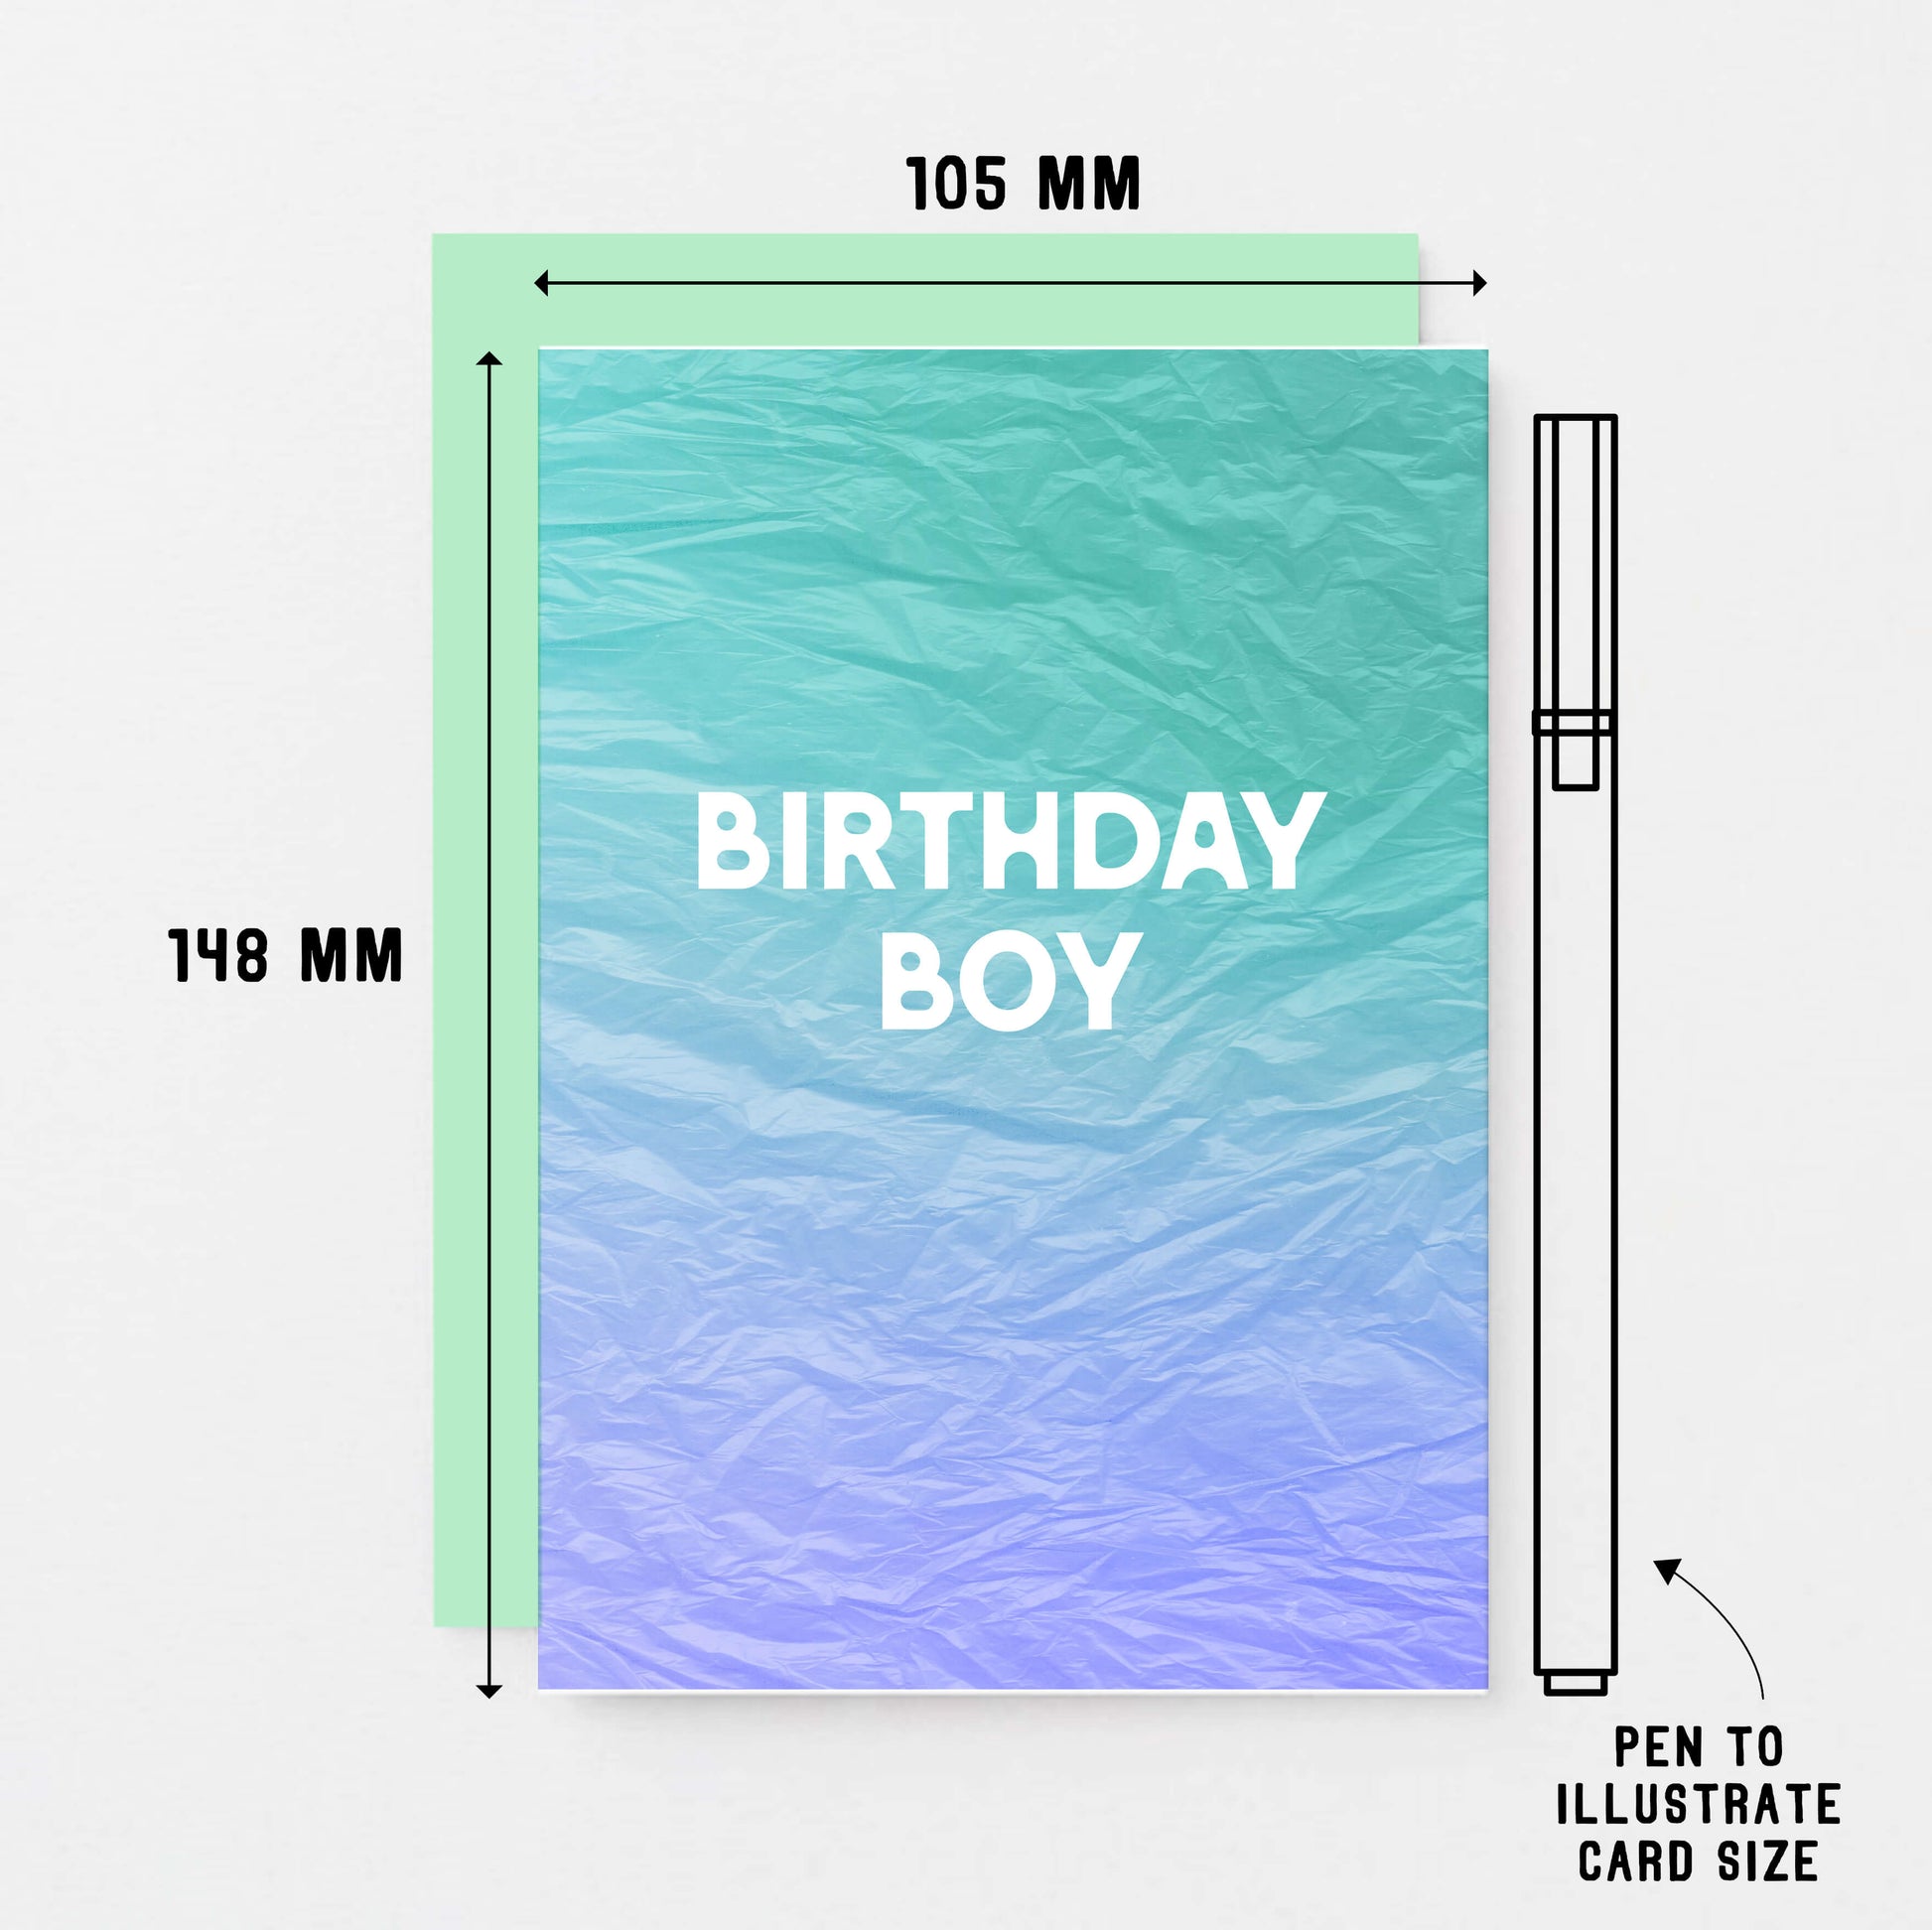 Birthday Boy by SixElevenCreations. Product Code SE4003A6